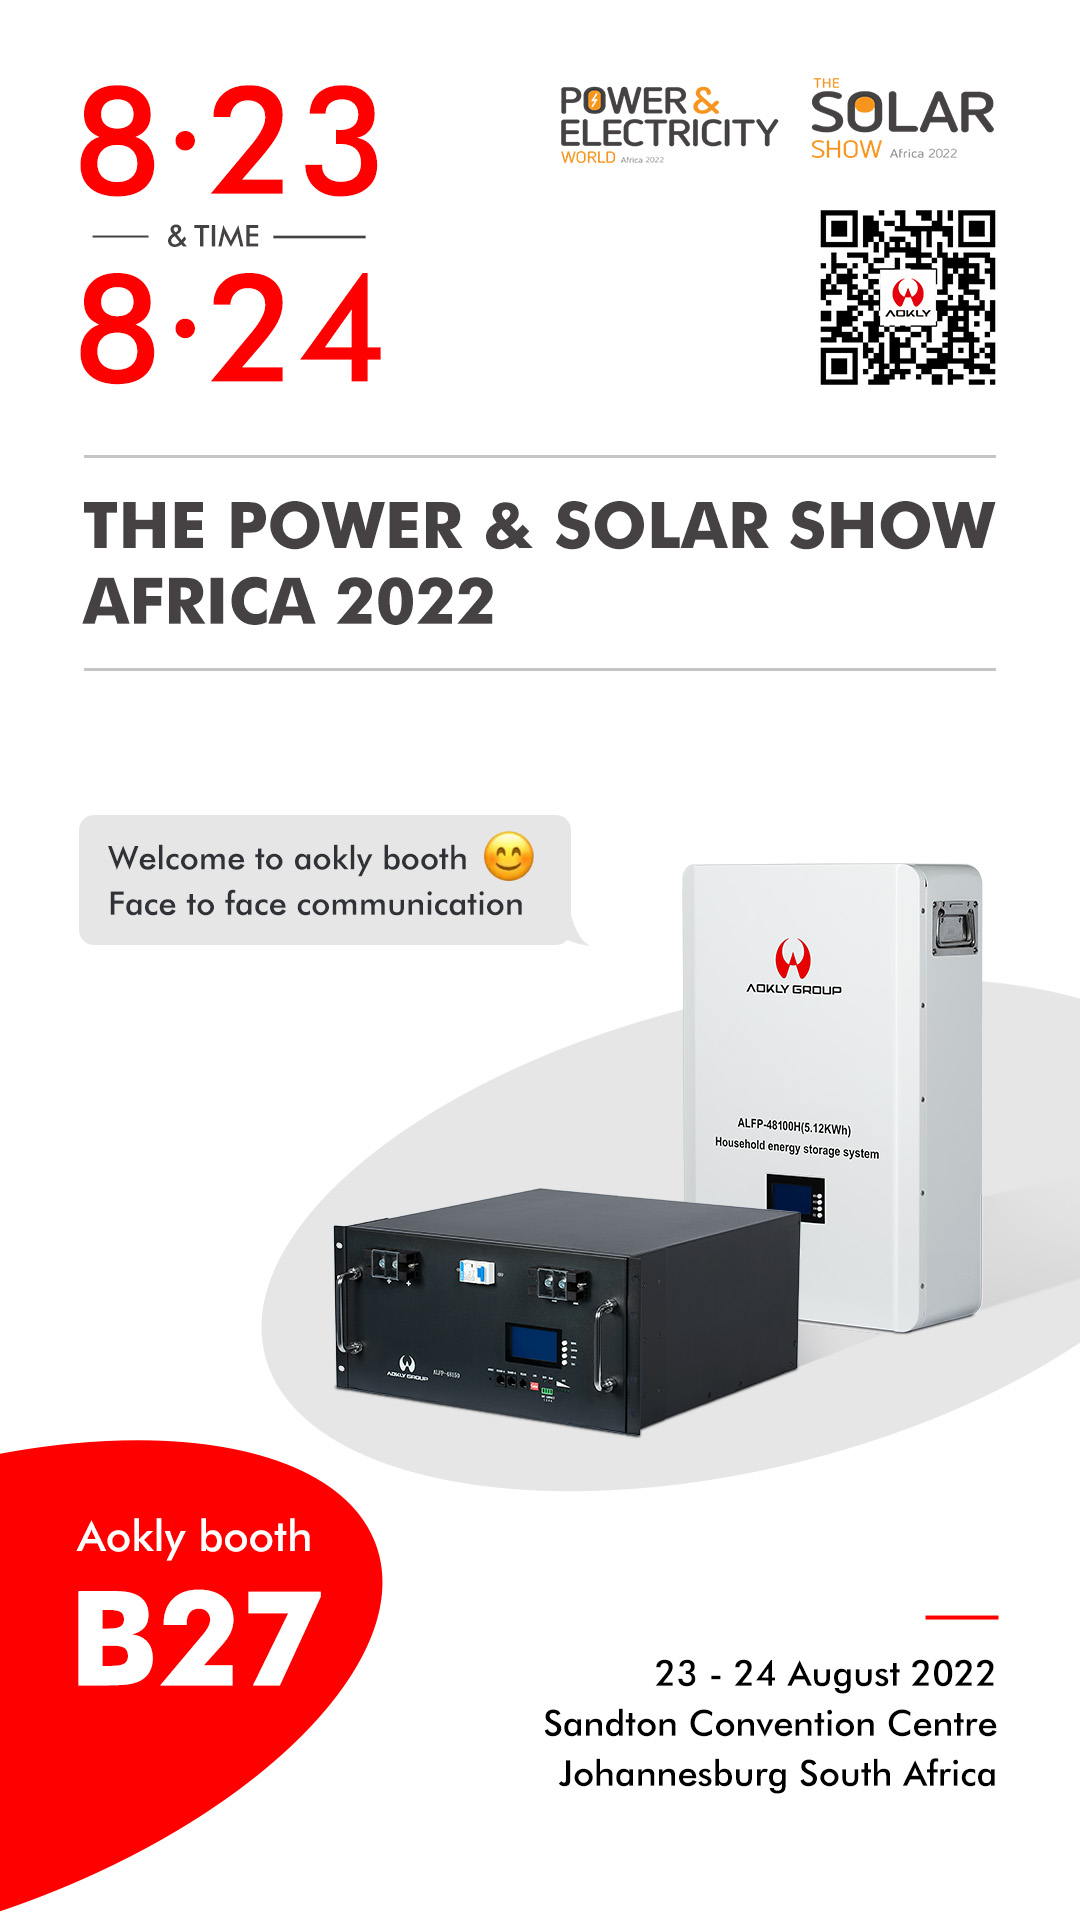 Aokly in Power & Electricity World Africa & The Solar Show Africa 2022！